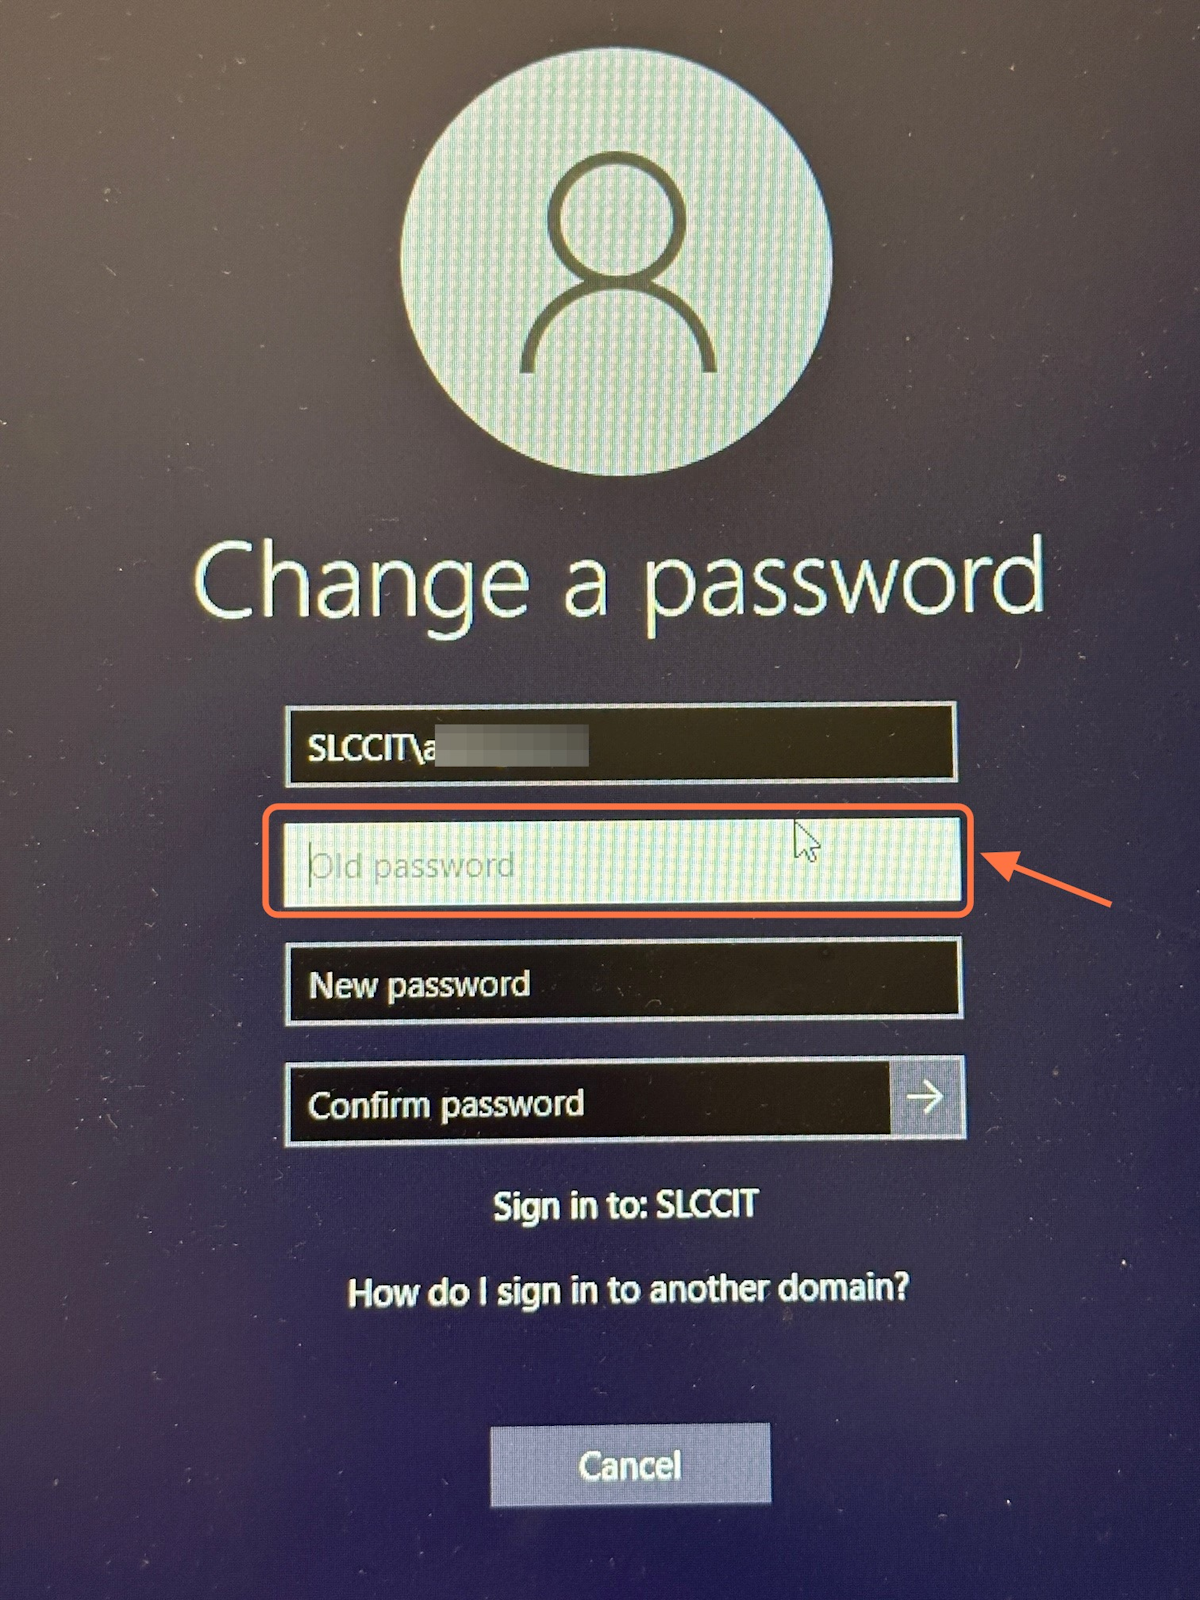 Put your old password where it says Old password